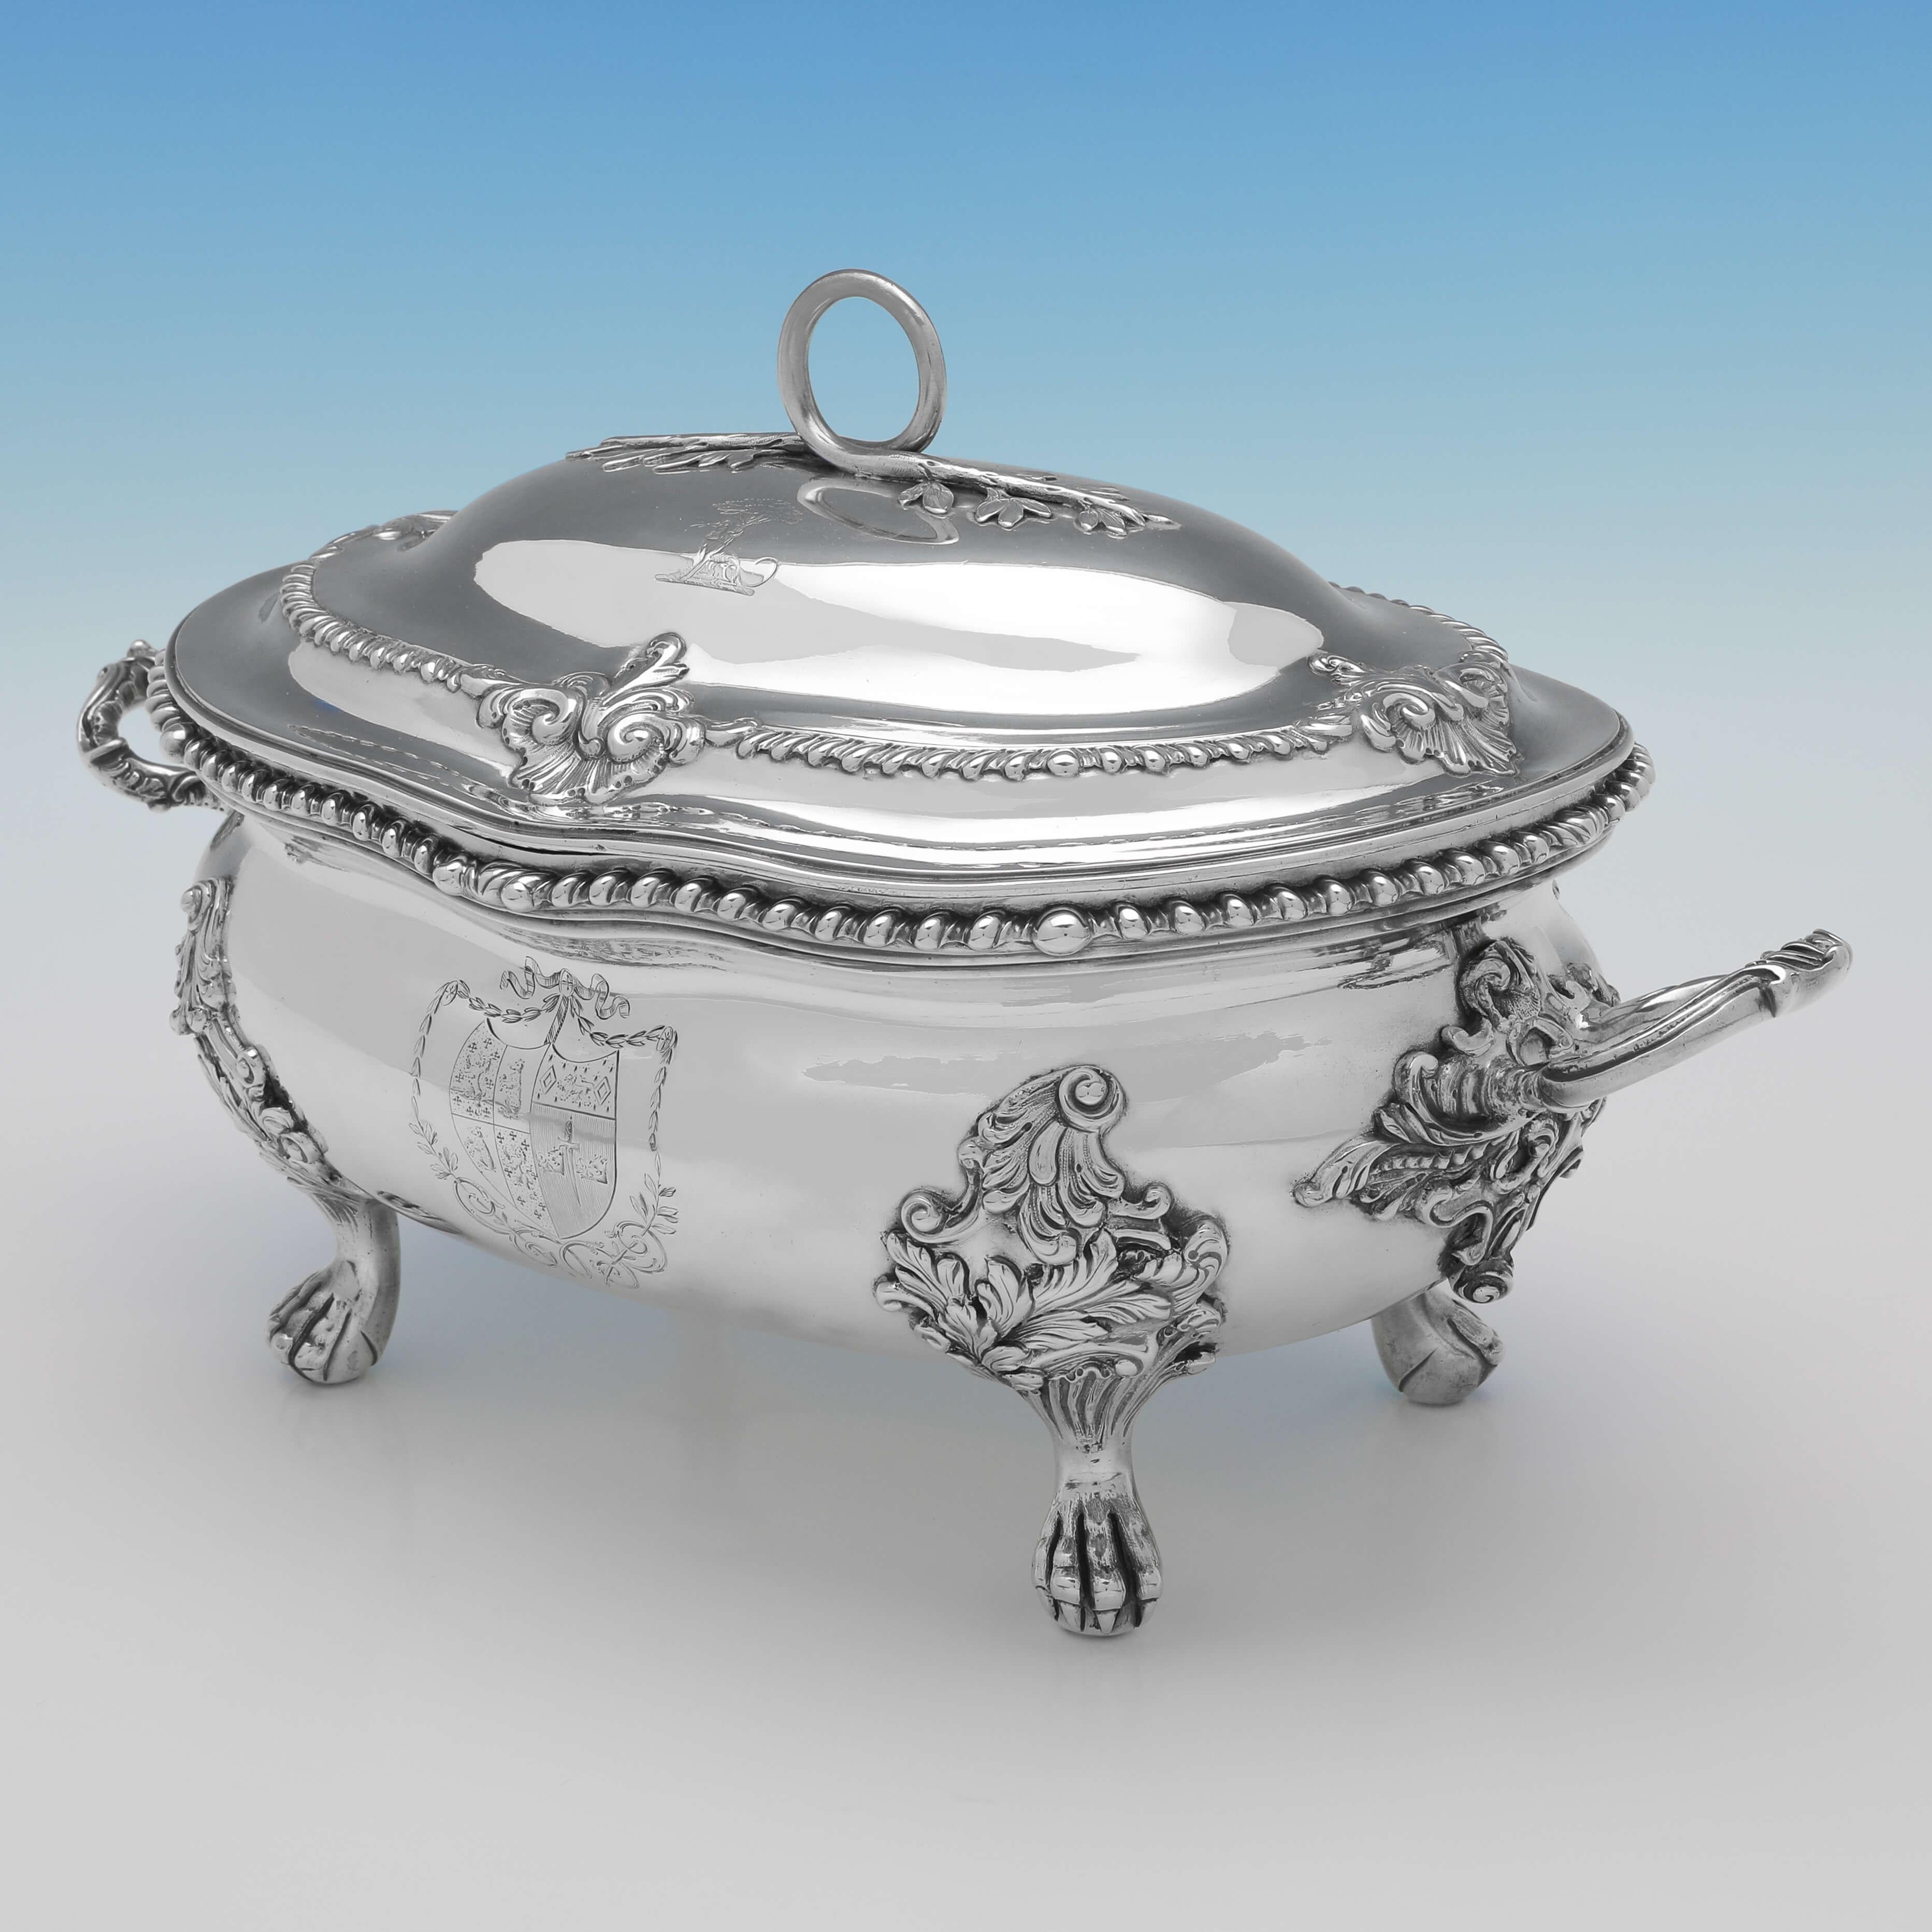 Hallmarked in London in 1766 by Charles Frederick Kandler, this striking, George III, Antique Sterling Silver Soup Tureen, features gadroon borders, ornate feet and handles, and is engraved with a coat of arms to the body and crest to the lid. The